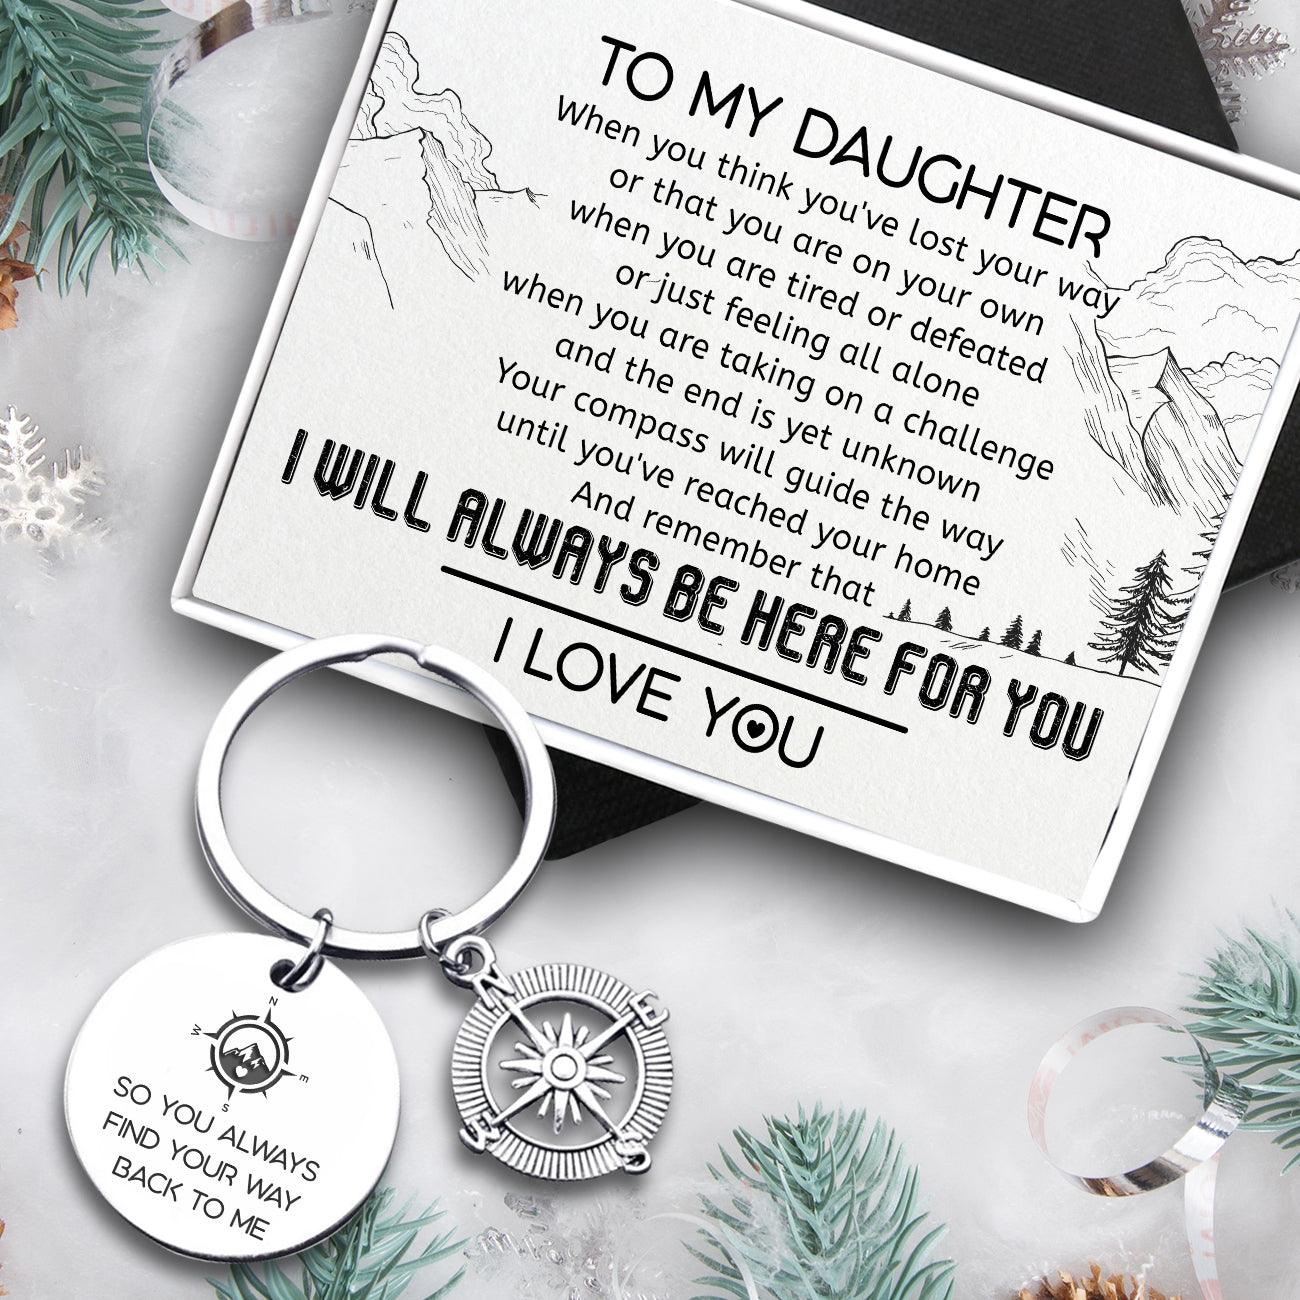 Compass Keychain - Family - To My Daughter - I Will Always Be Here For You - Augkw17004 - Gifts Holder